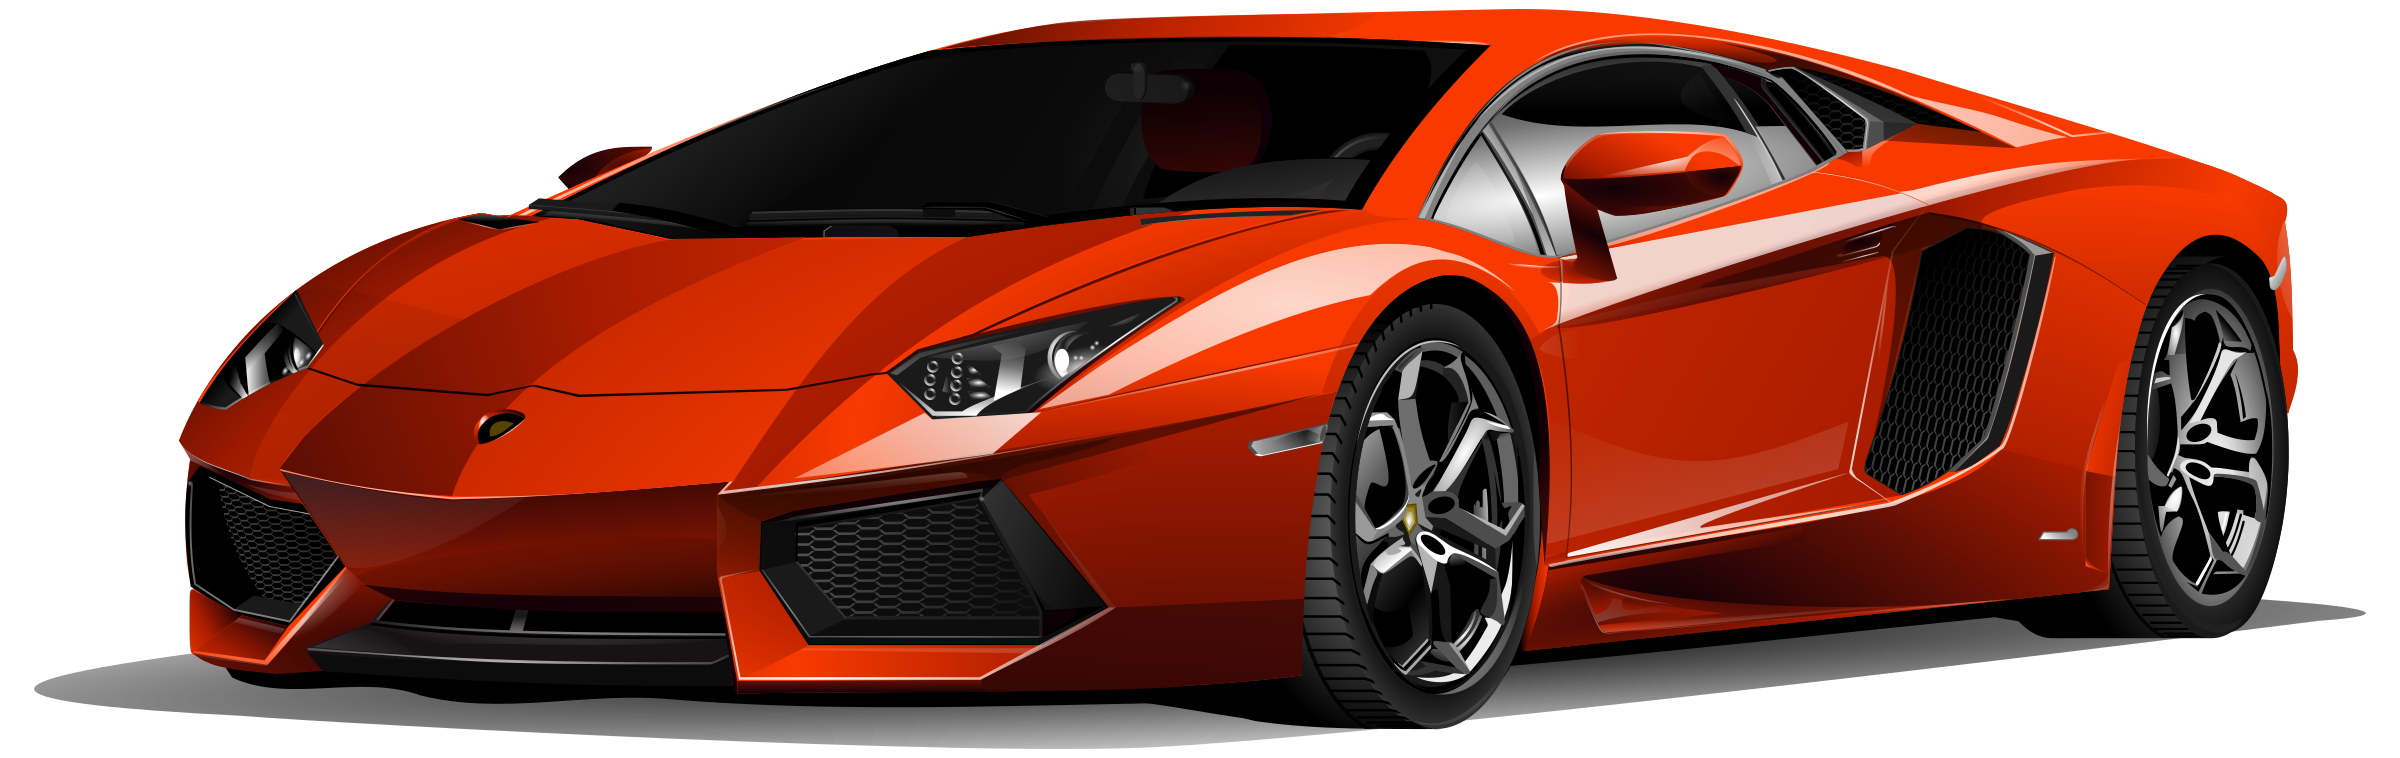 Car Red PNG - 140831